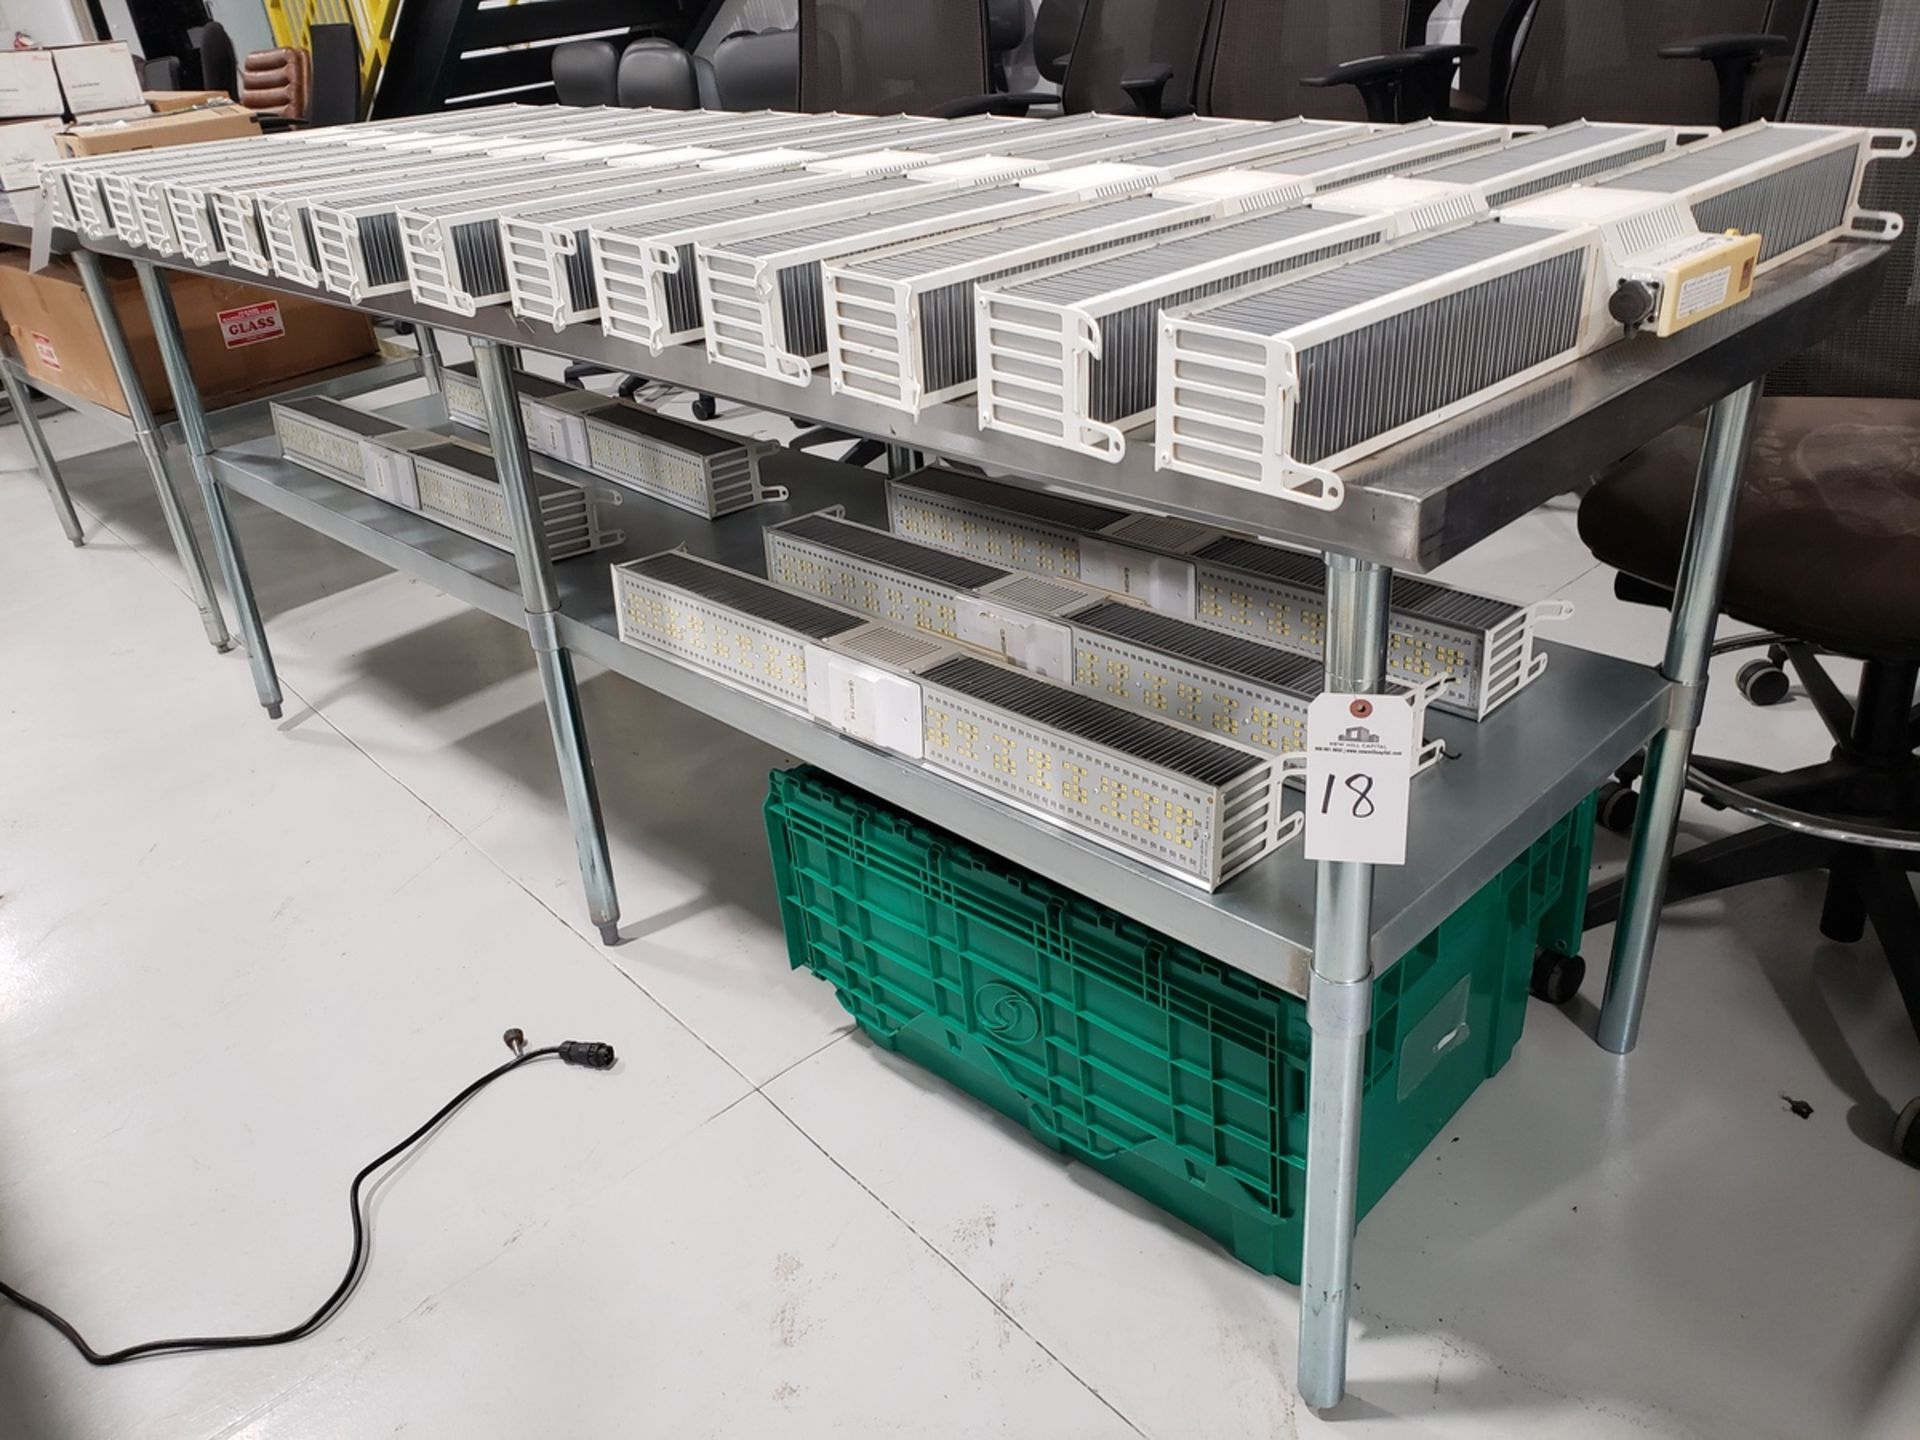 Stainless Steel Table, 30" X 8' | Rig Fee $75